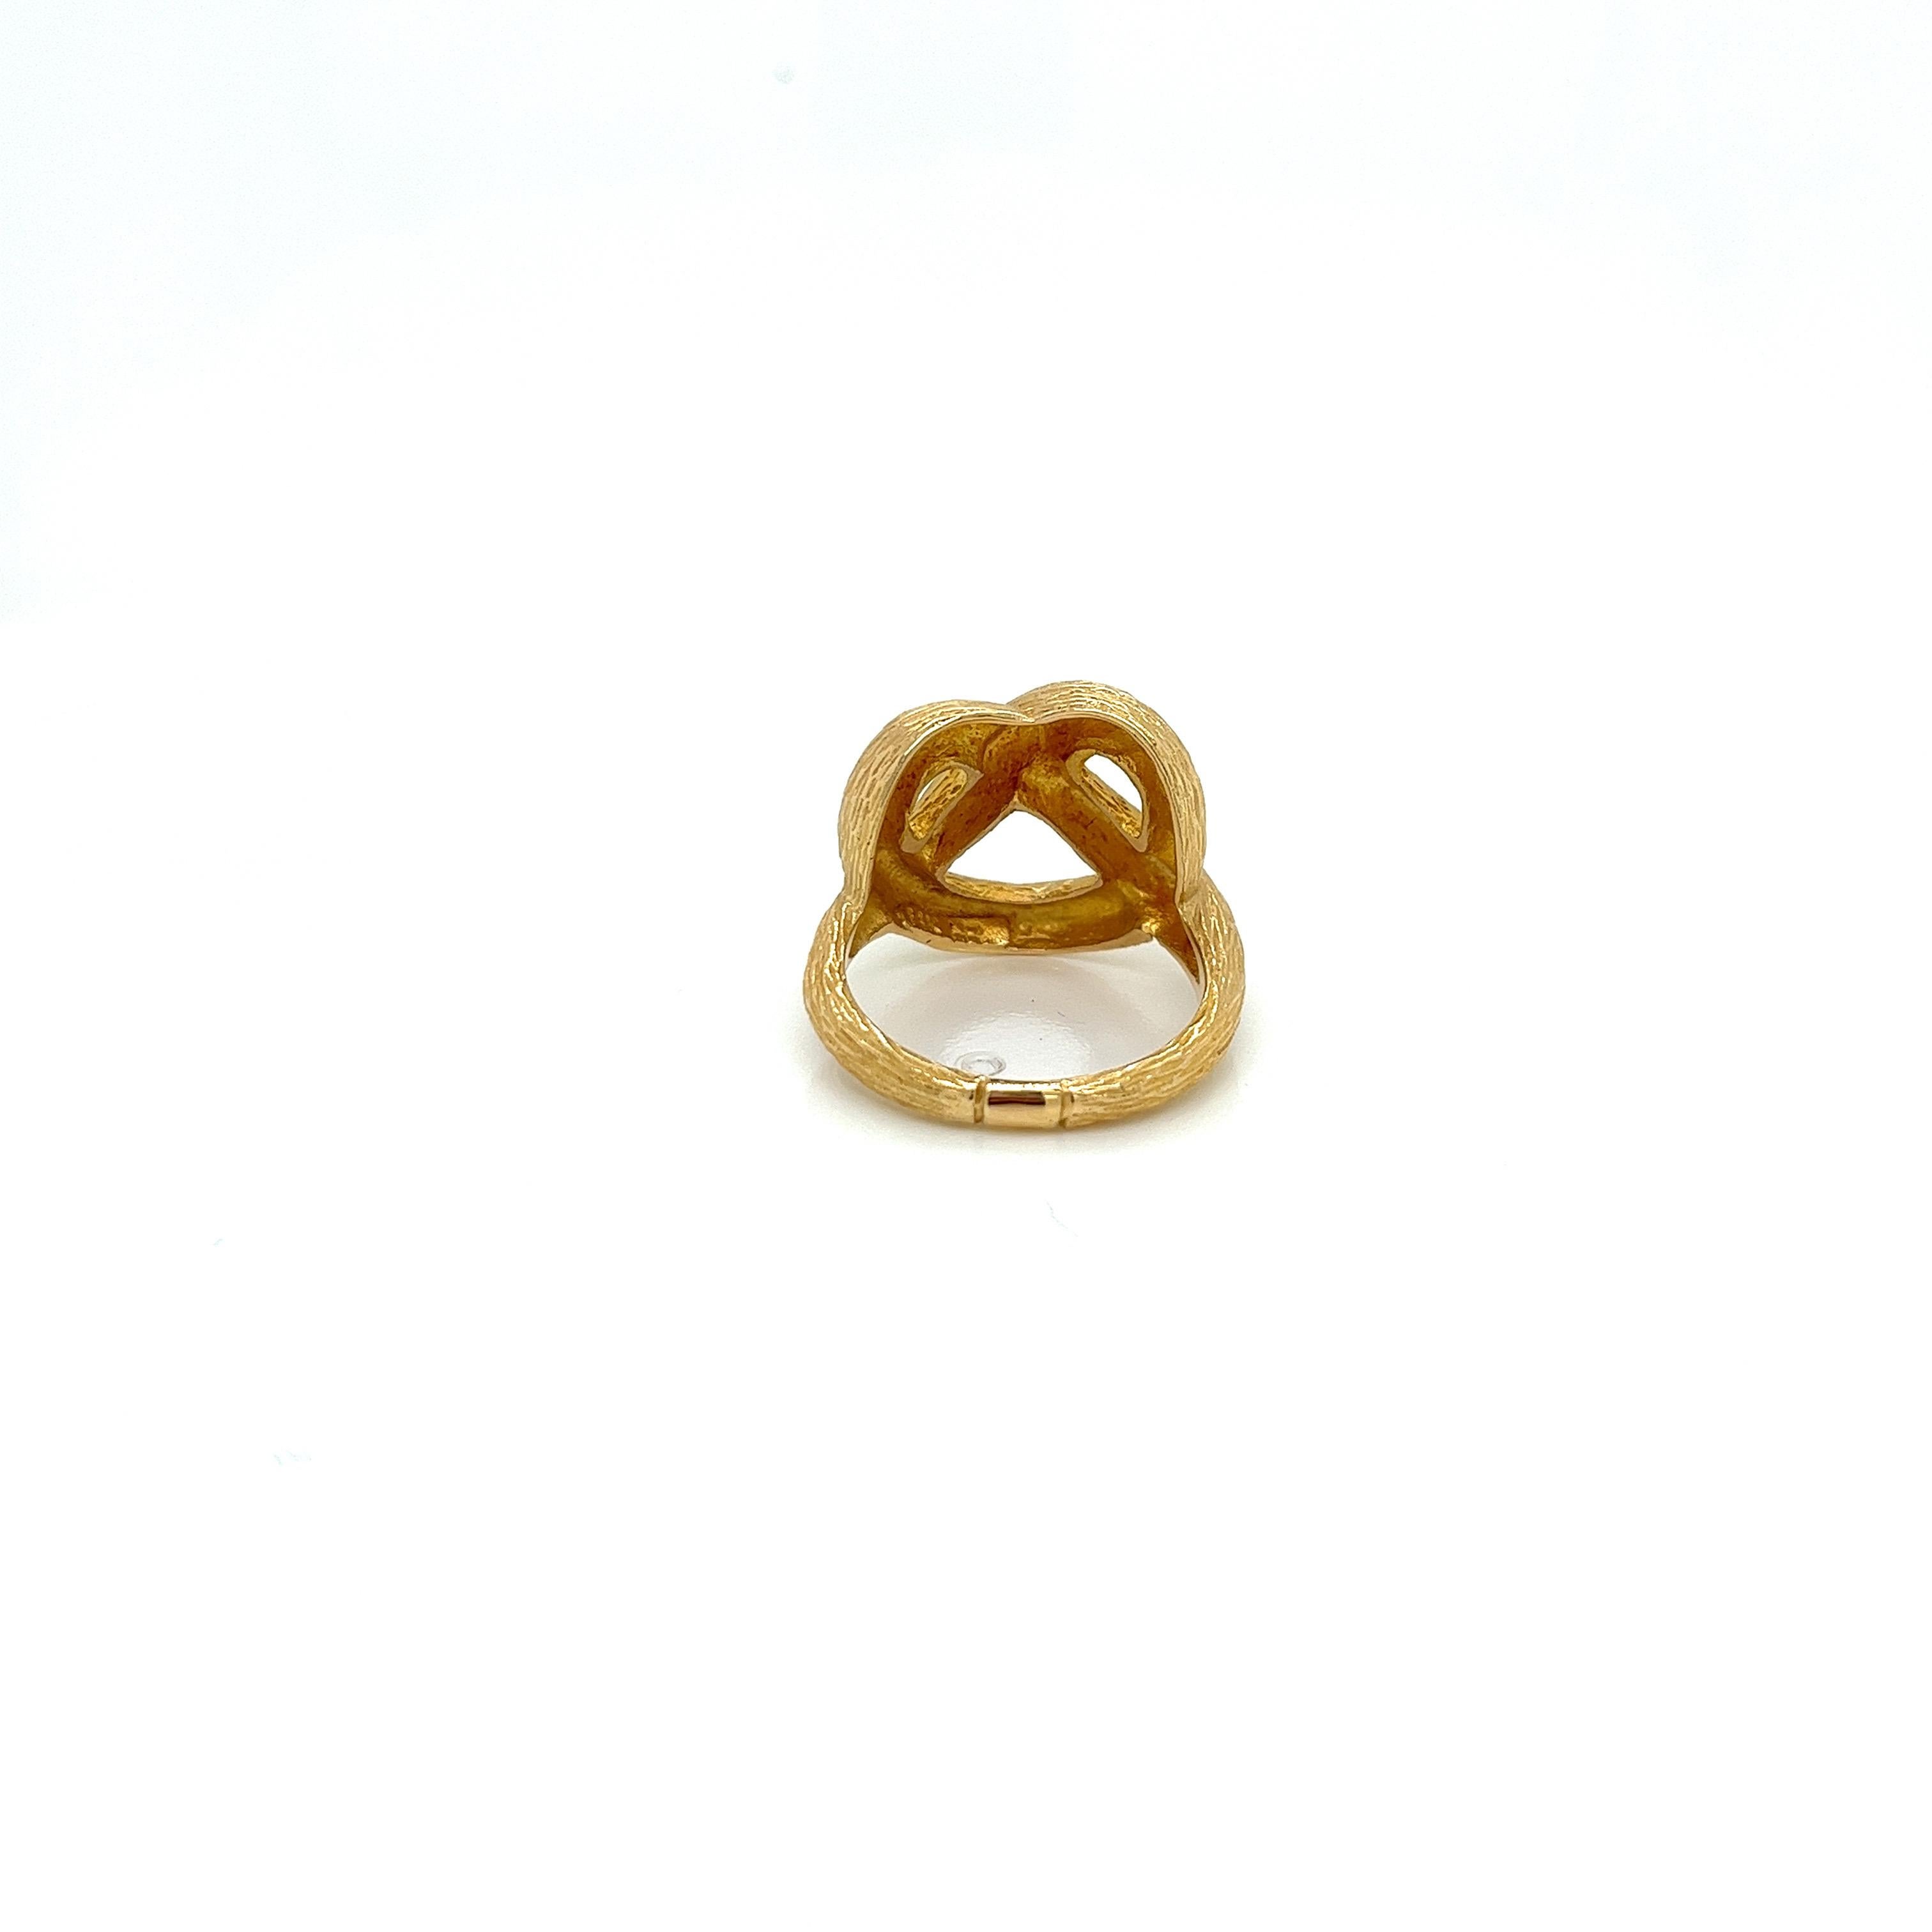 Vintage 1980's 18k Yellow Gold Pretzel Statement Ring. The measure of the top of the ring 15mm x 18mm. The width of the band is 3mm wide. The finger size is 6.75 and it can be sized upon request. The ring weighs 5.67g.